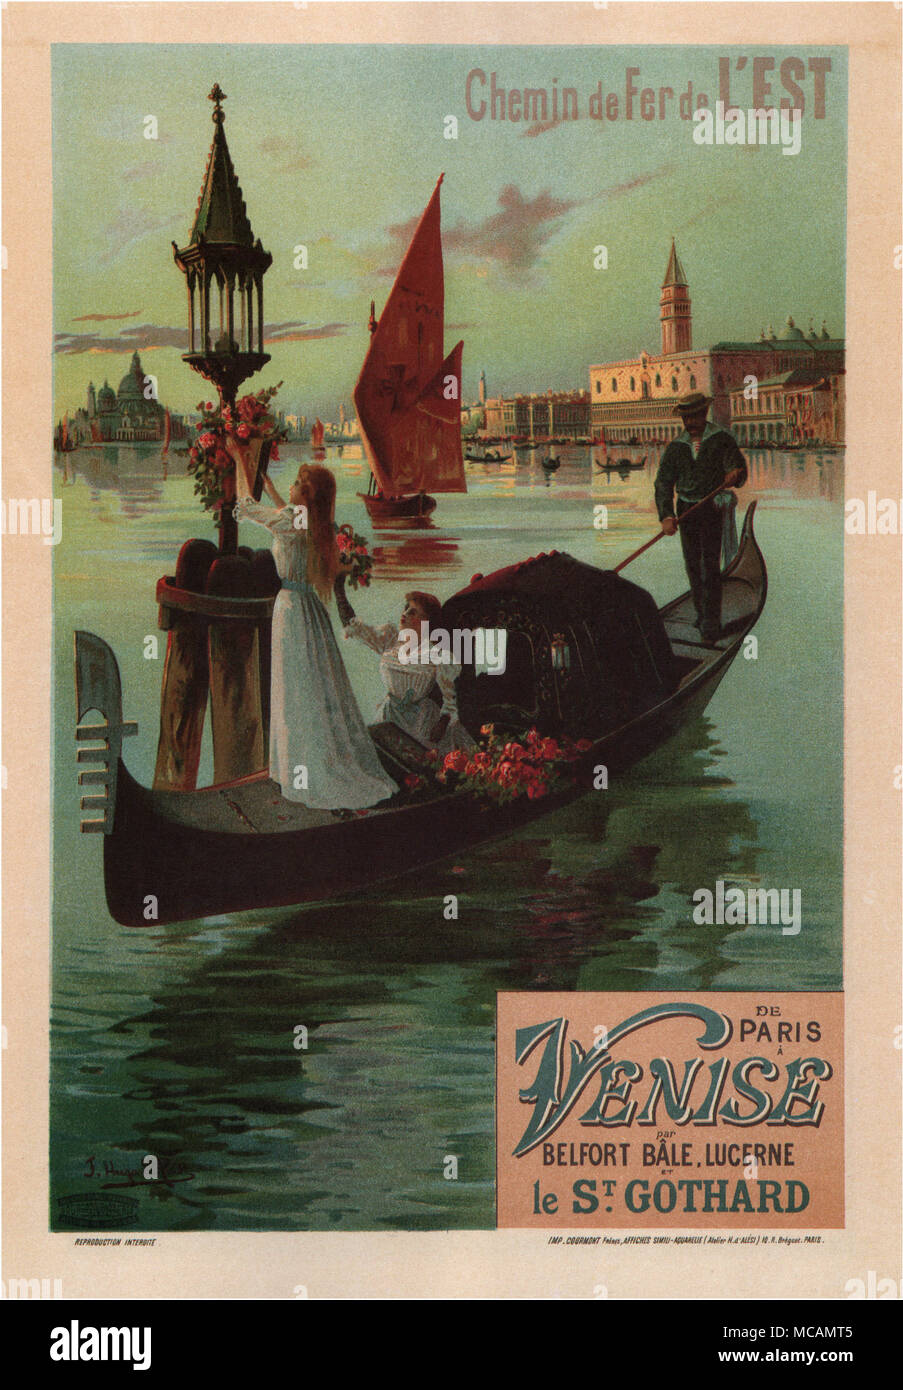 F. Hugo D'Alesi (Italian, 1849-1906) designed this French Rail poster for travel to Venice Italy.  The Compagnie des chemins de fer de l'Est (CF de l'Est), often referred to simply as the Est company, was an early French railway company. The company was formed in 1853 by fusion from Compagnie de Paris ? Strasbourg, operating the Paris-Strasbourg line, and Compagnie du chemin de fer de Montereau ? Troyes. In 1854 company absorbed Compagnie de Strasbourg ? Bale and in 1863 the railway network of Ardennes.  Here a woman on a gondola arranges flowers on a street lamp along the waterway. Stock Photo